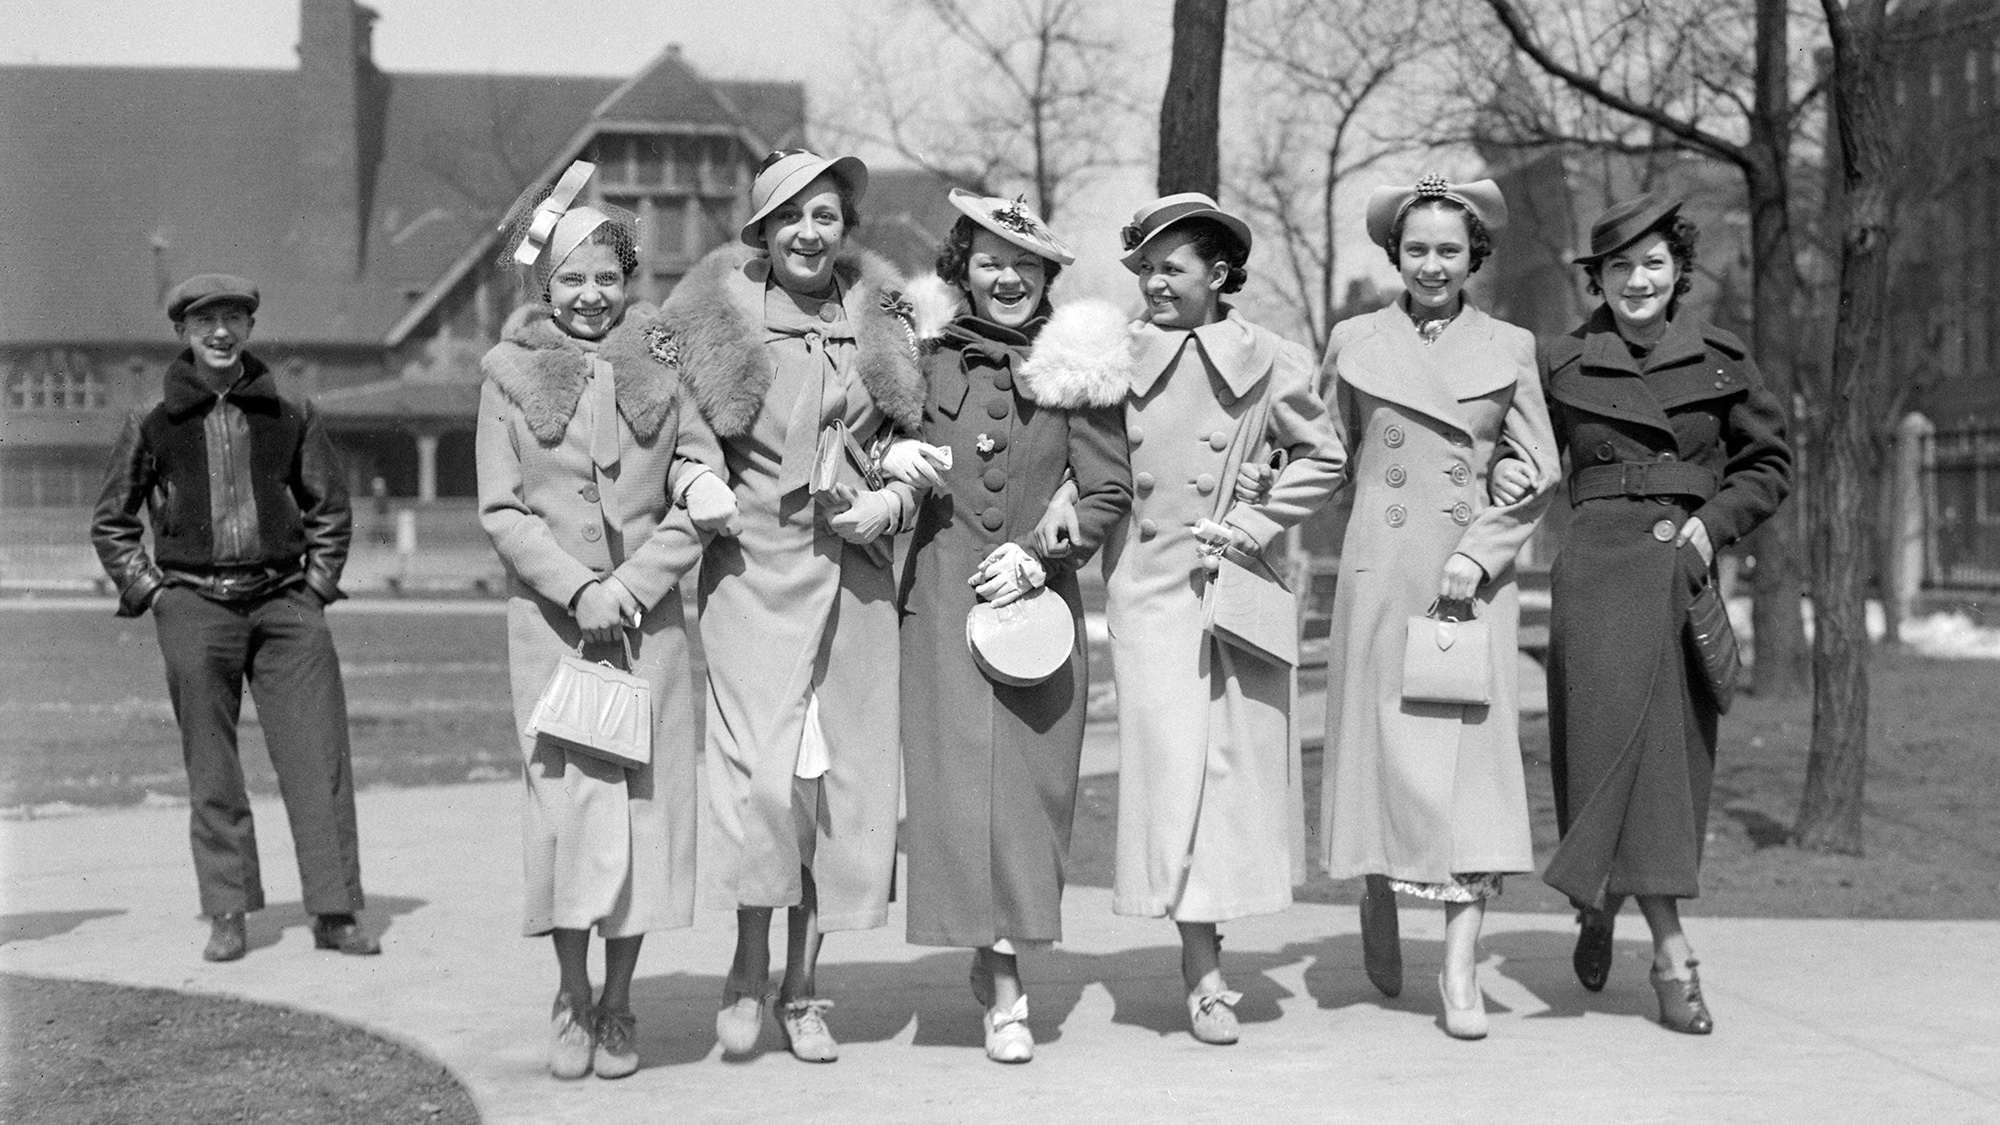 Women Wearing Trousers in the 1930s. : r/fashionhistory